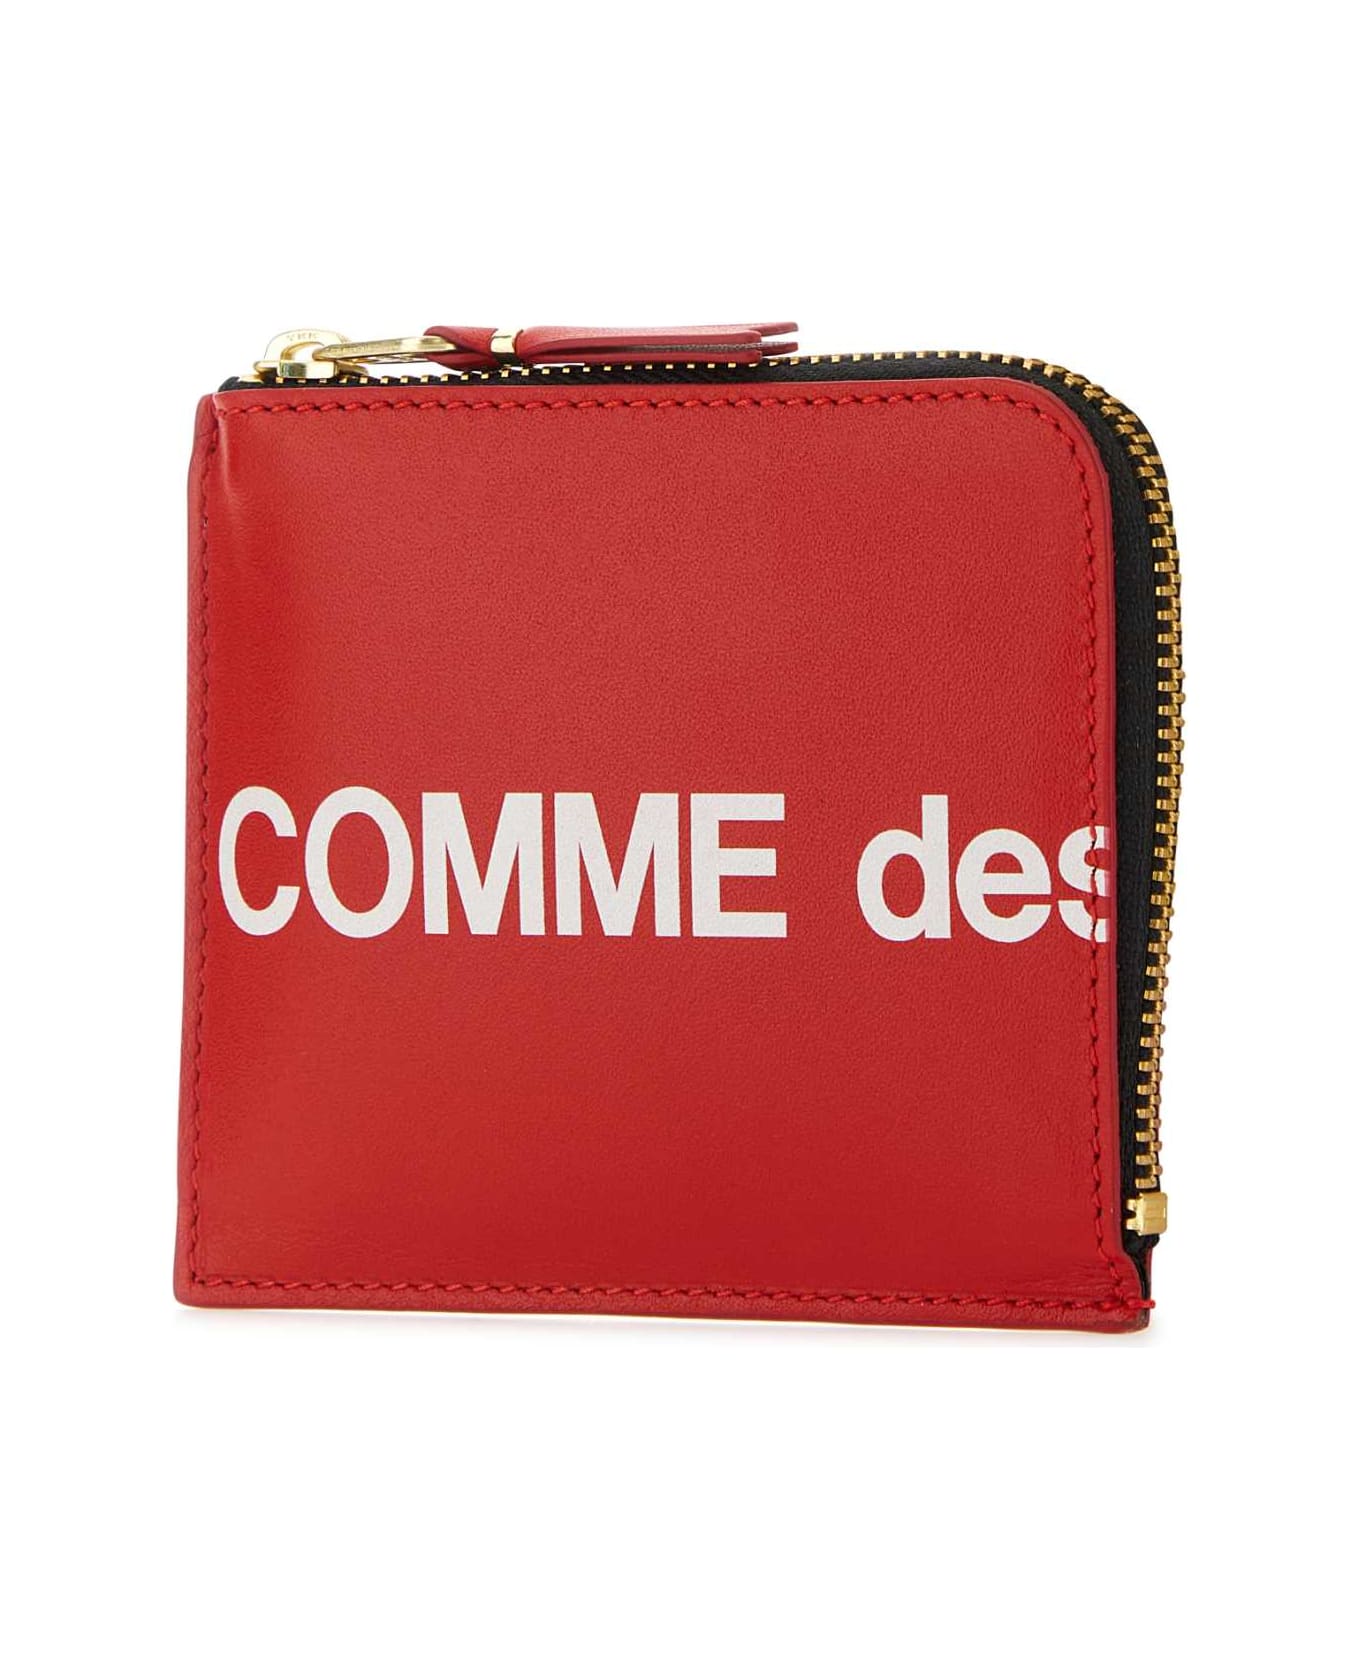 Comme des Garçons Red Leather Coin Case - RED 財布